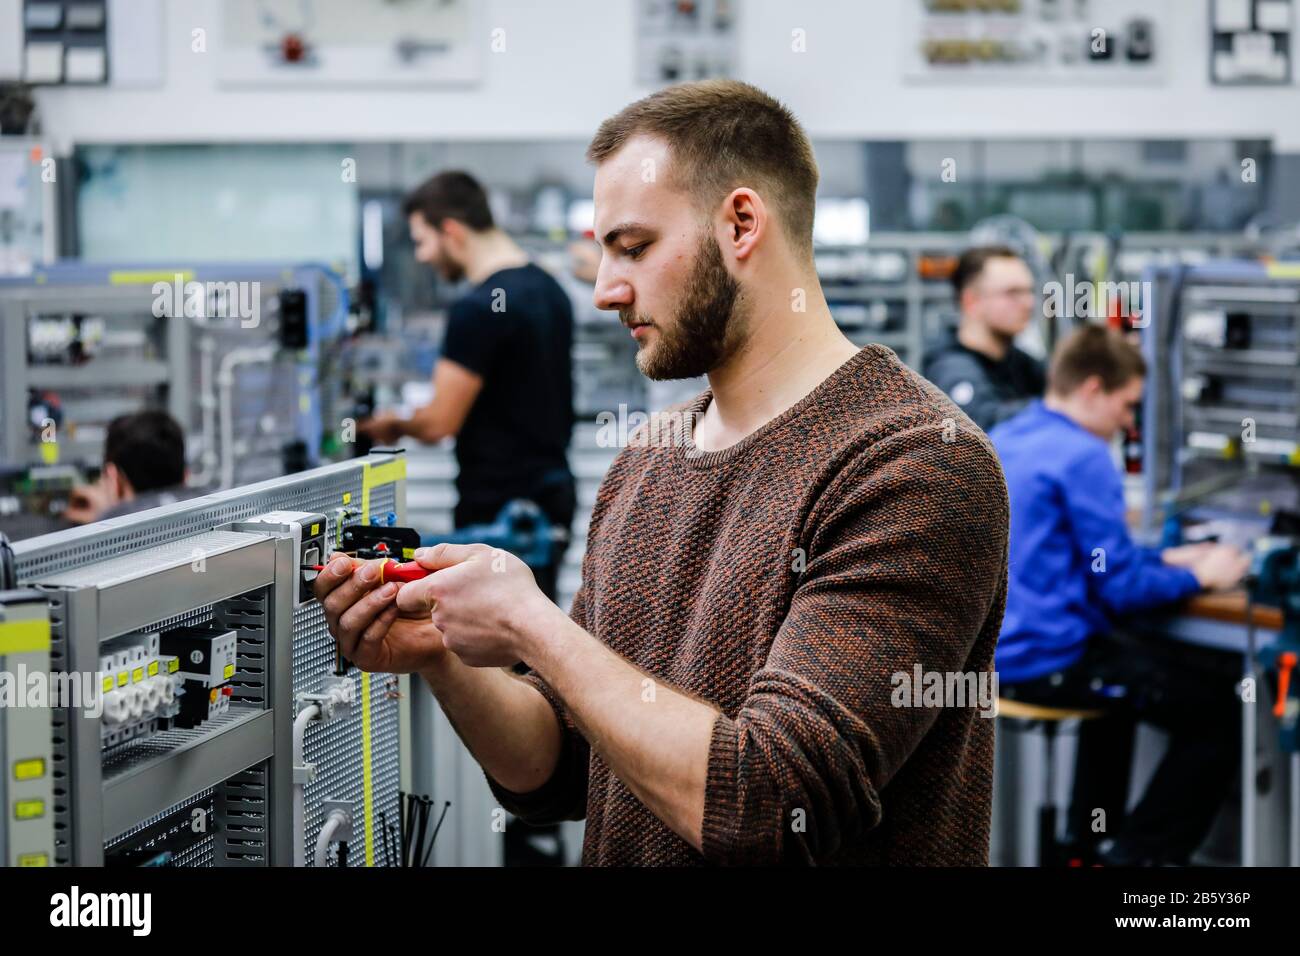 Remscheid, North Rhine-Westphalia, Germany - Trainee in electrical professions, an industrial electrician assembles a circuit, vocational training cen Stock Photo